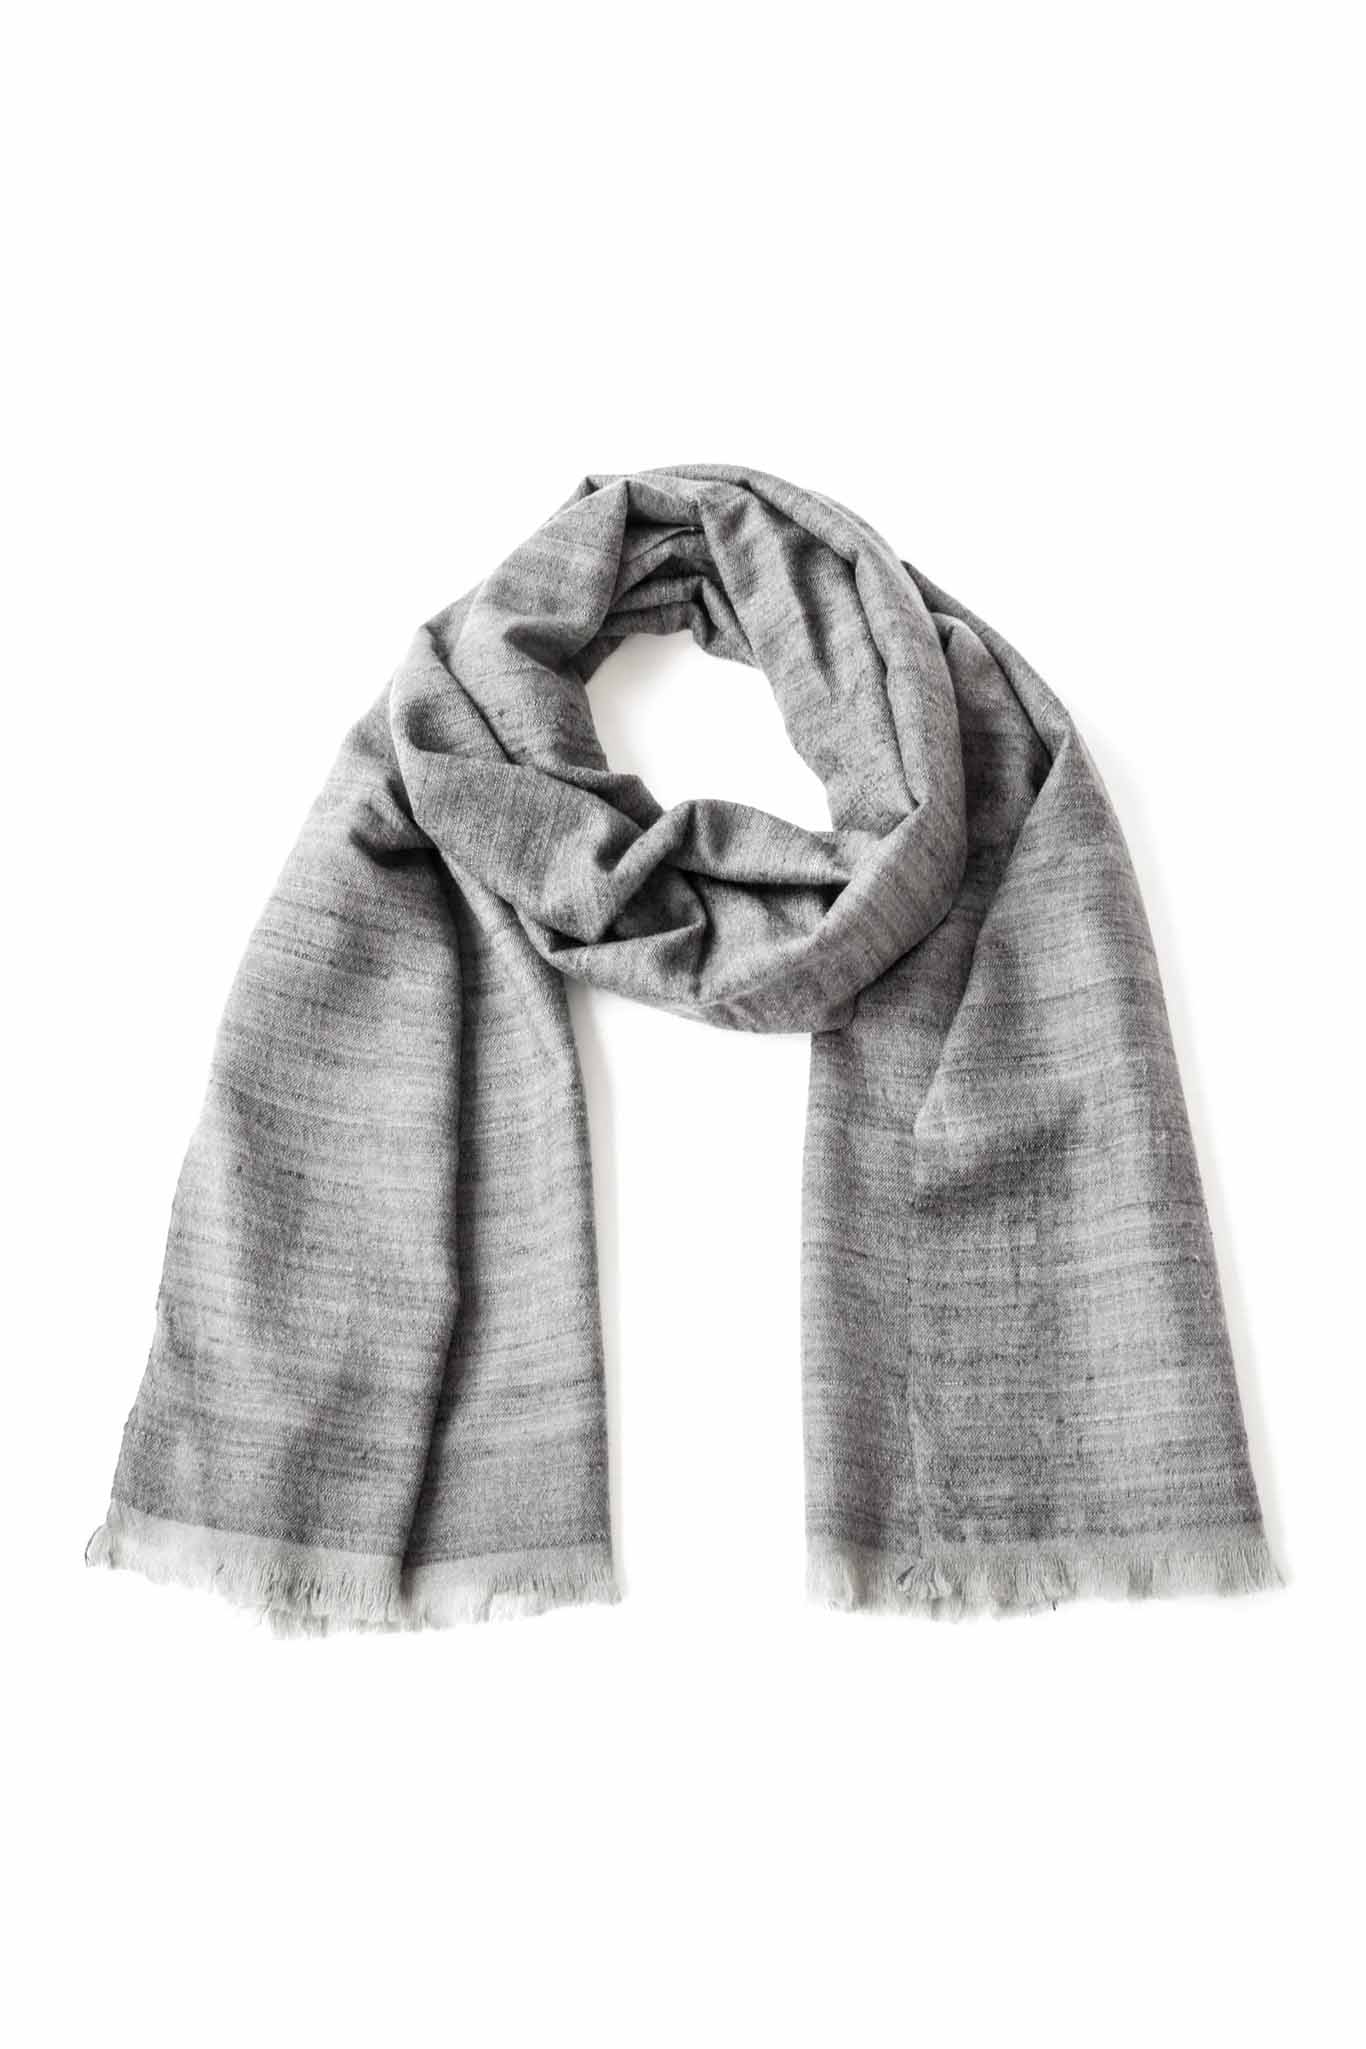 From the Road Komala Scarf - Silver